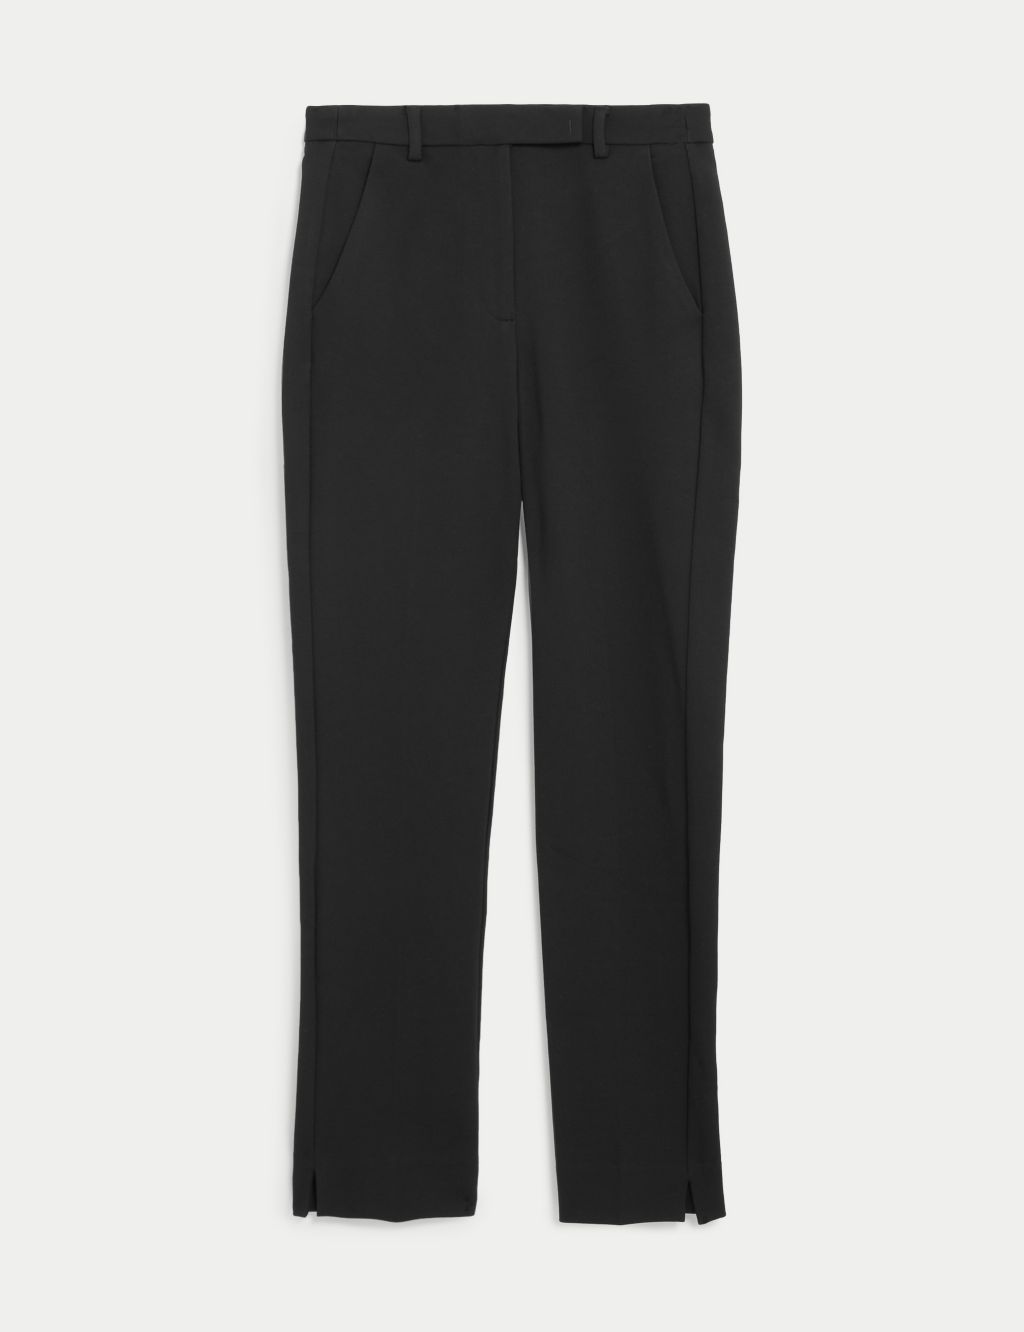 Jersey Slim Fit Ankle Grazer Trousers image 2